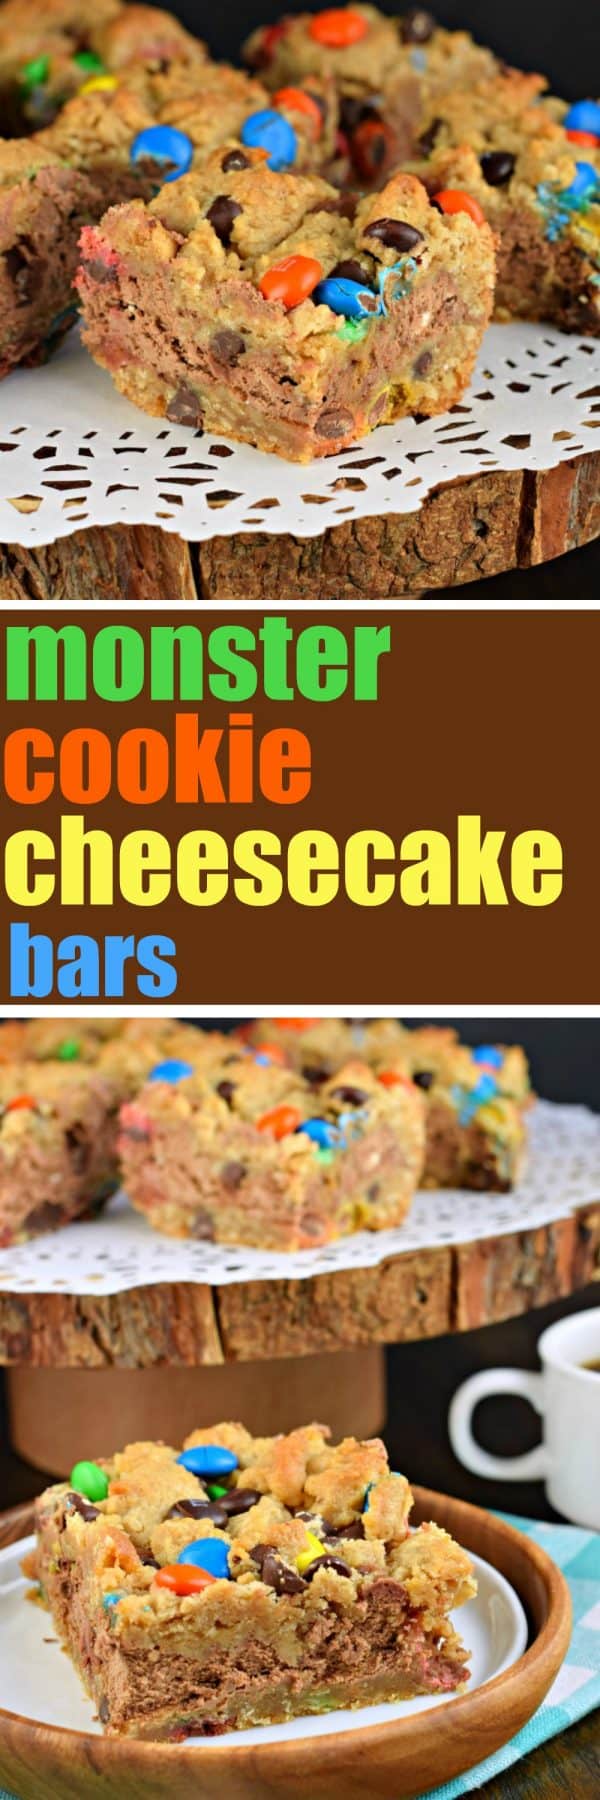 These Monster Cookie Cheesecake Bars are two layers of cookie dough packed with peanut butter and M&M'S candy and filled with a creamy chocolate cheesecake filling! #cookiedough #cheesecake #dessert